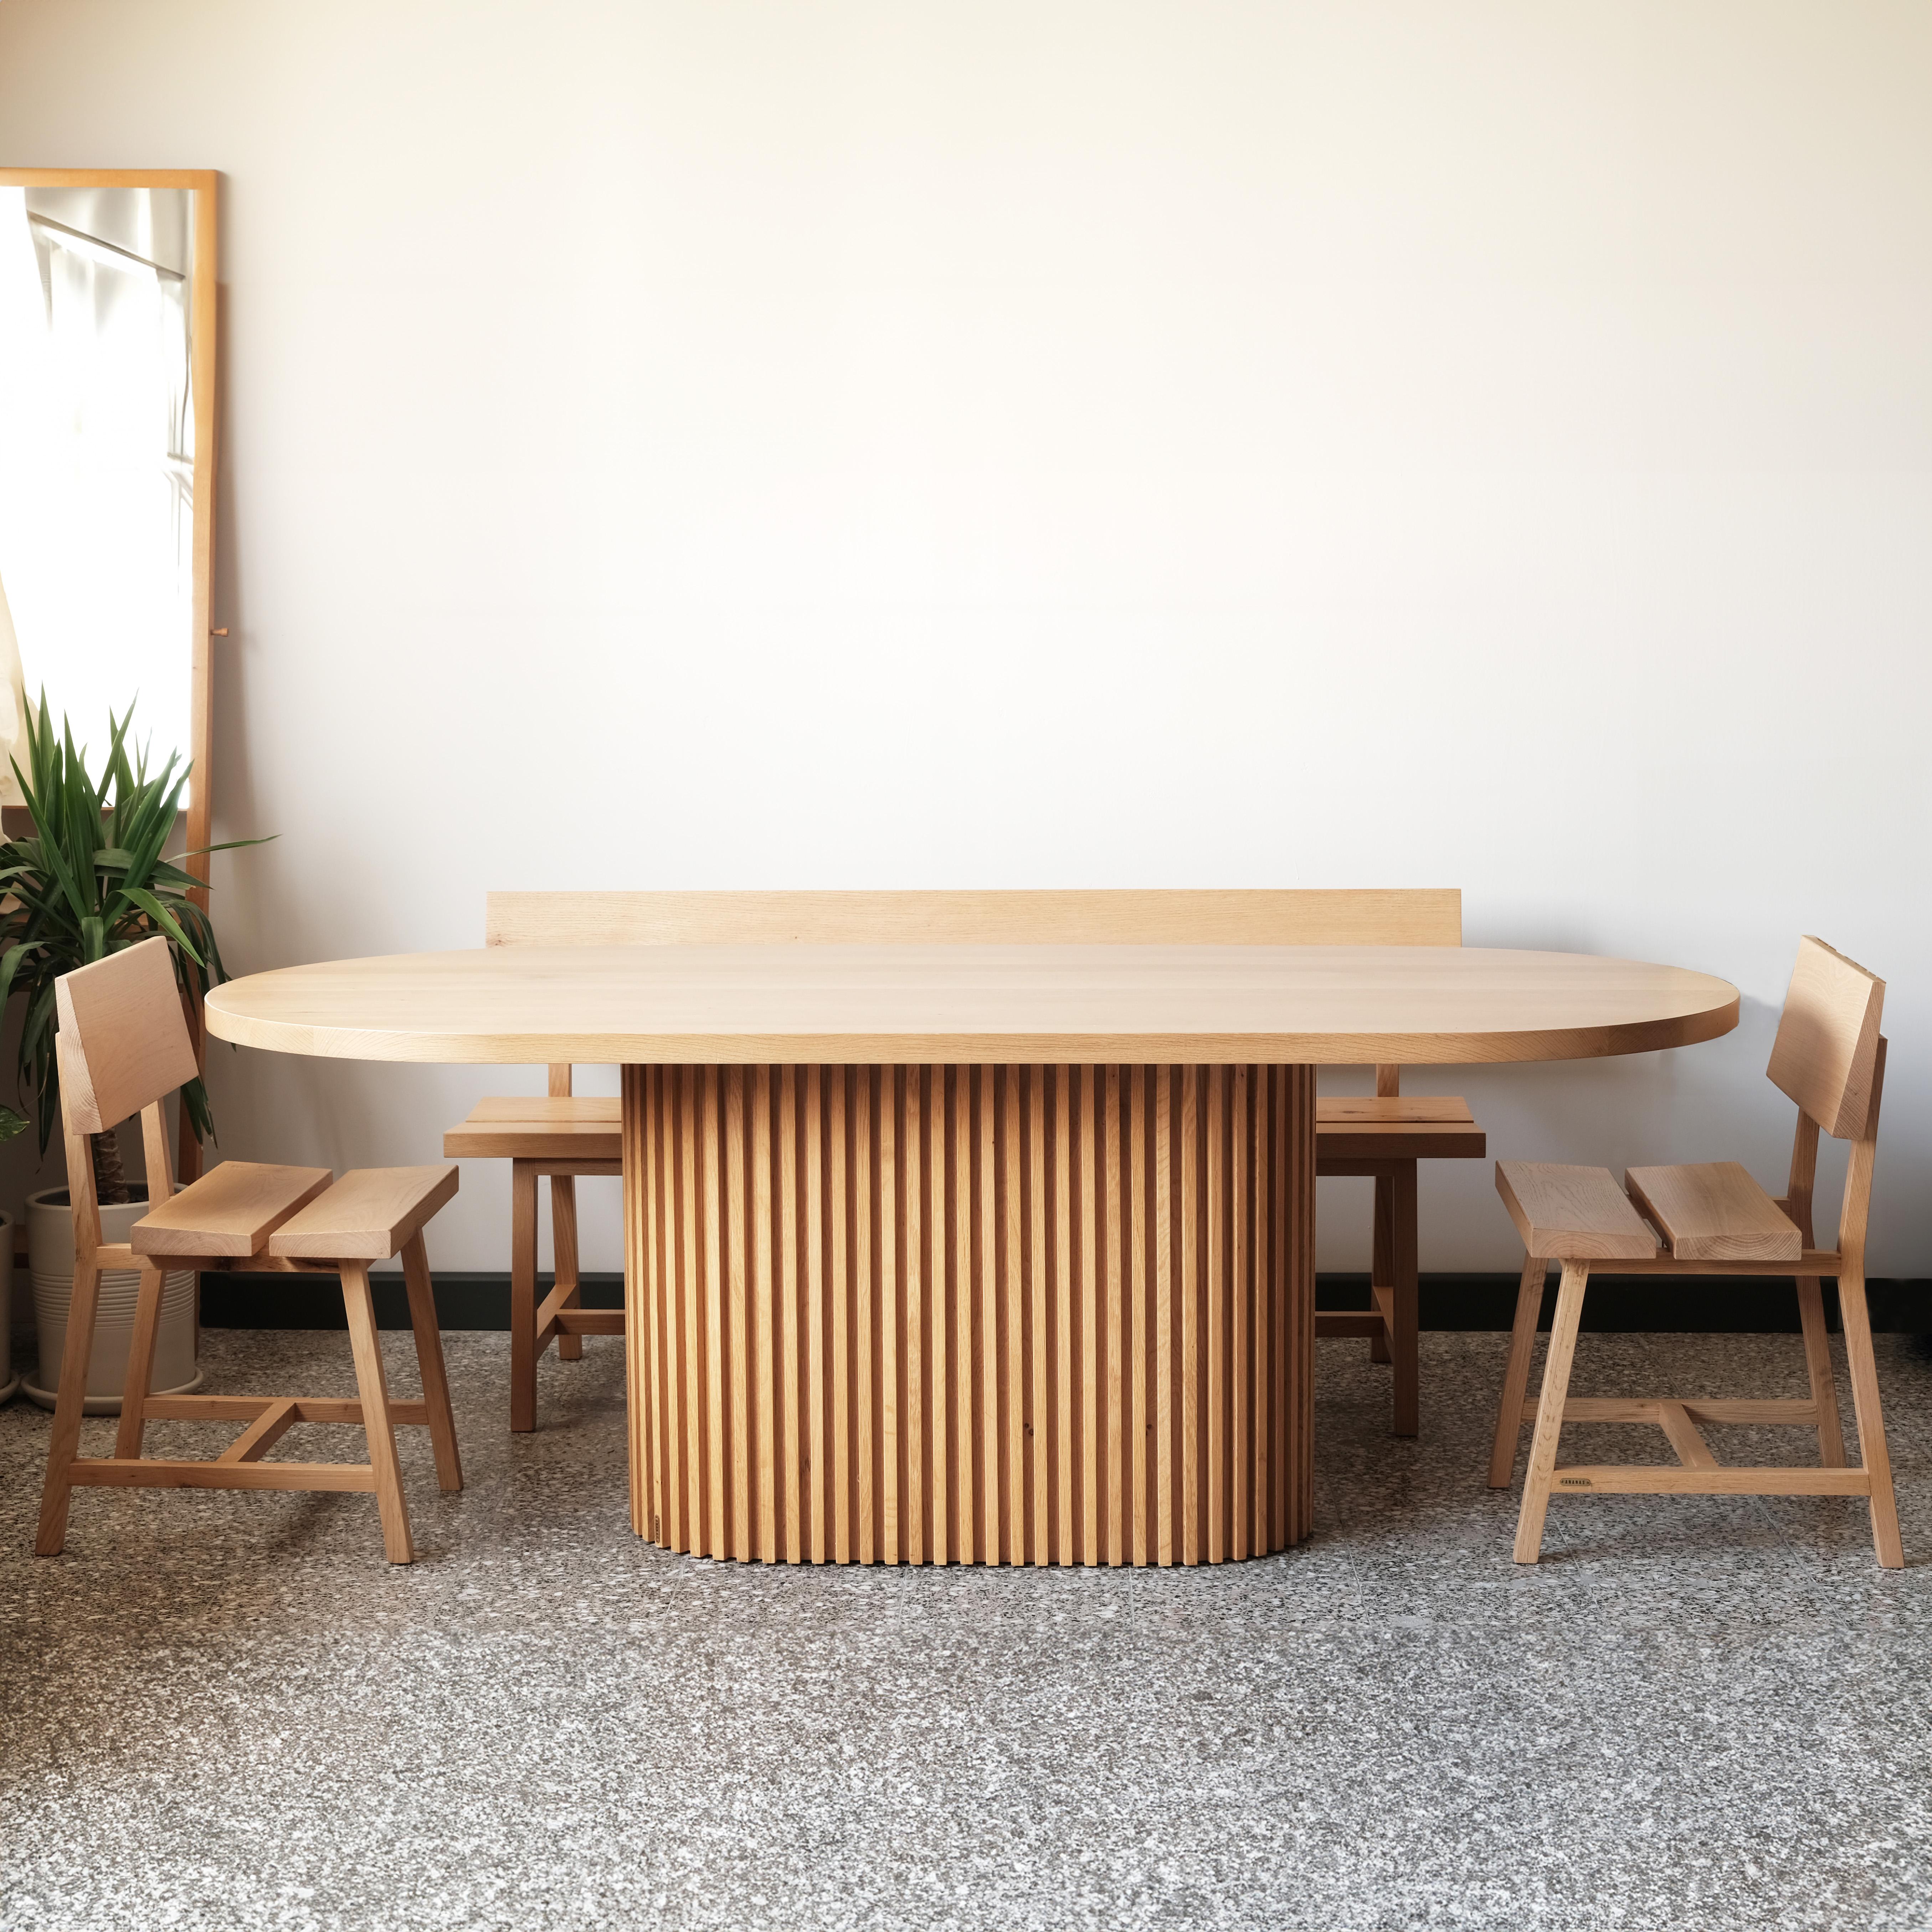 - Included in the DOCIA Series, this table has a first-class oak oval tabletop and a oval leg made of independent slats.
-DOCIA Table features a base crafted from individually unique slats of oak wood. The texture of the wood creates a warm and